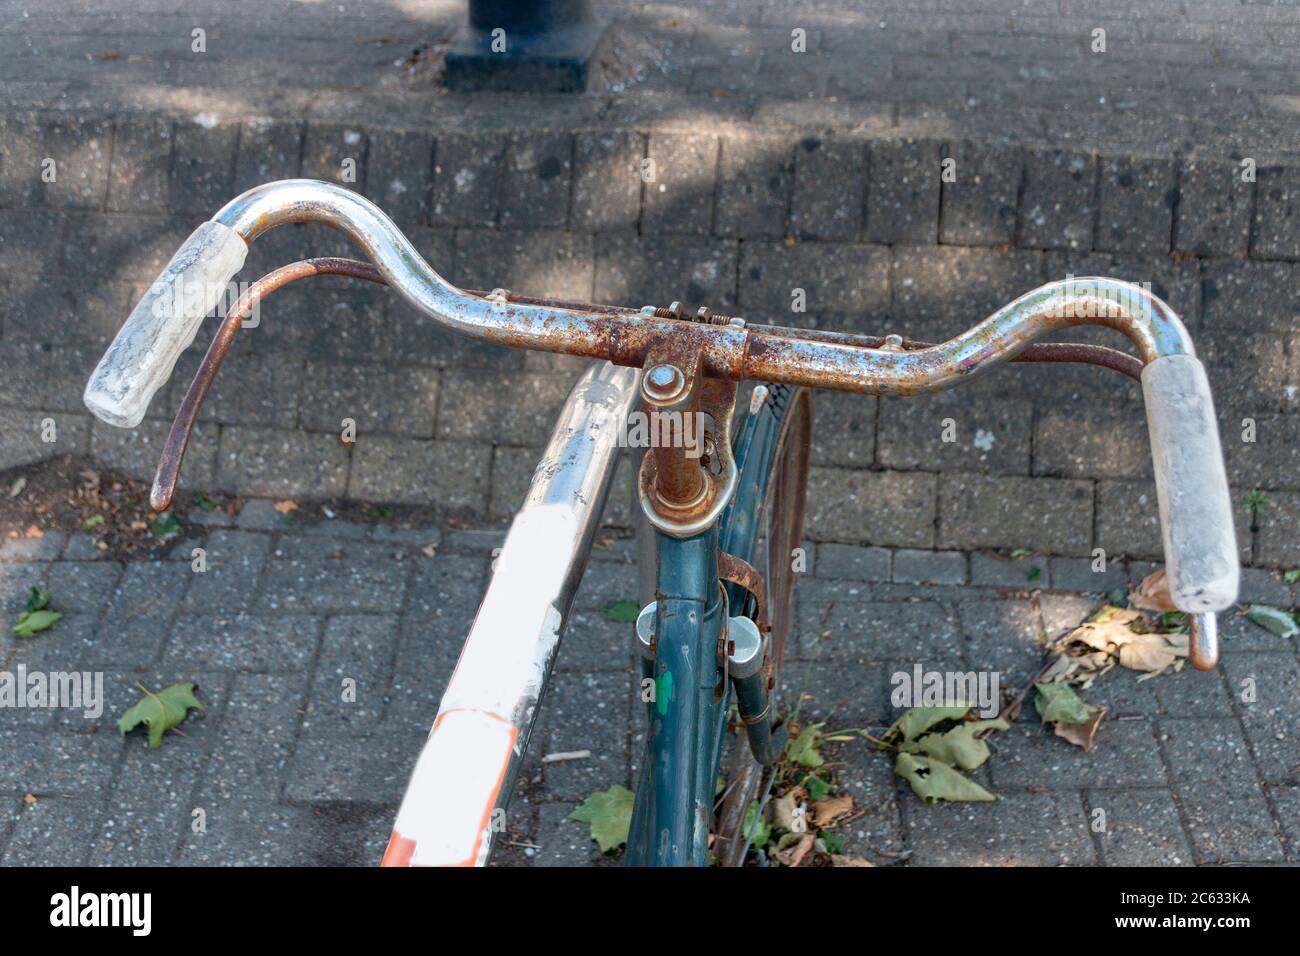 a close up view of a rusted old bicycle that has been abandoned and locked to a bike rake in the city Stock Photo